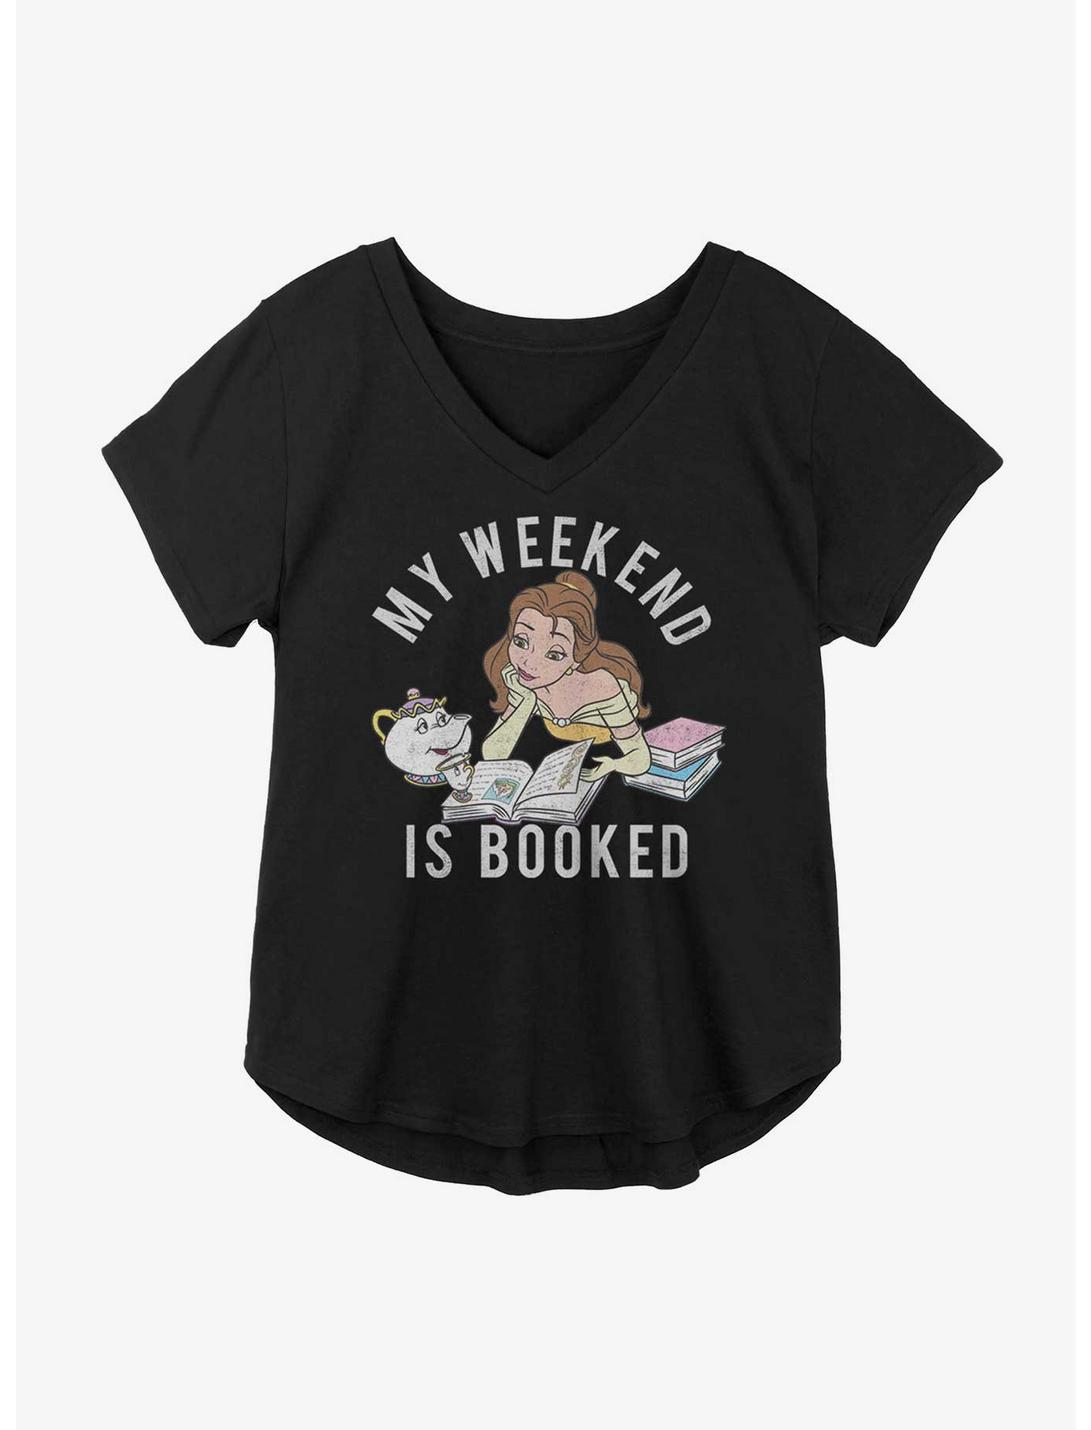 Disney Beauty And The Beast My Weekend Is Booked Girls Plus Size T-Shirt, BLACK, hi-res